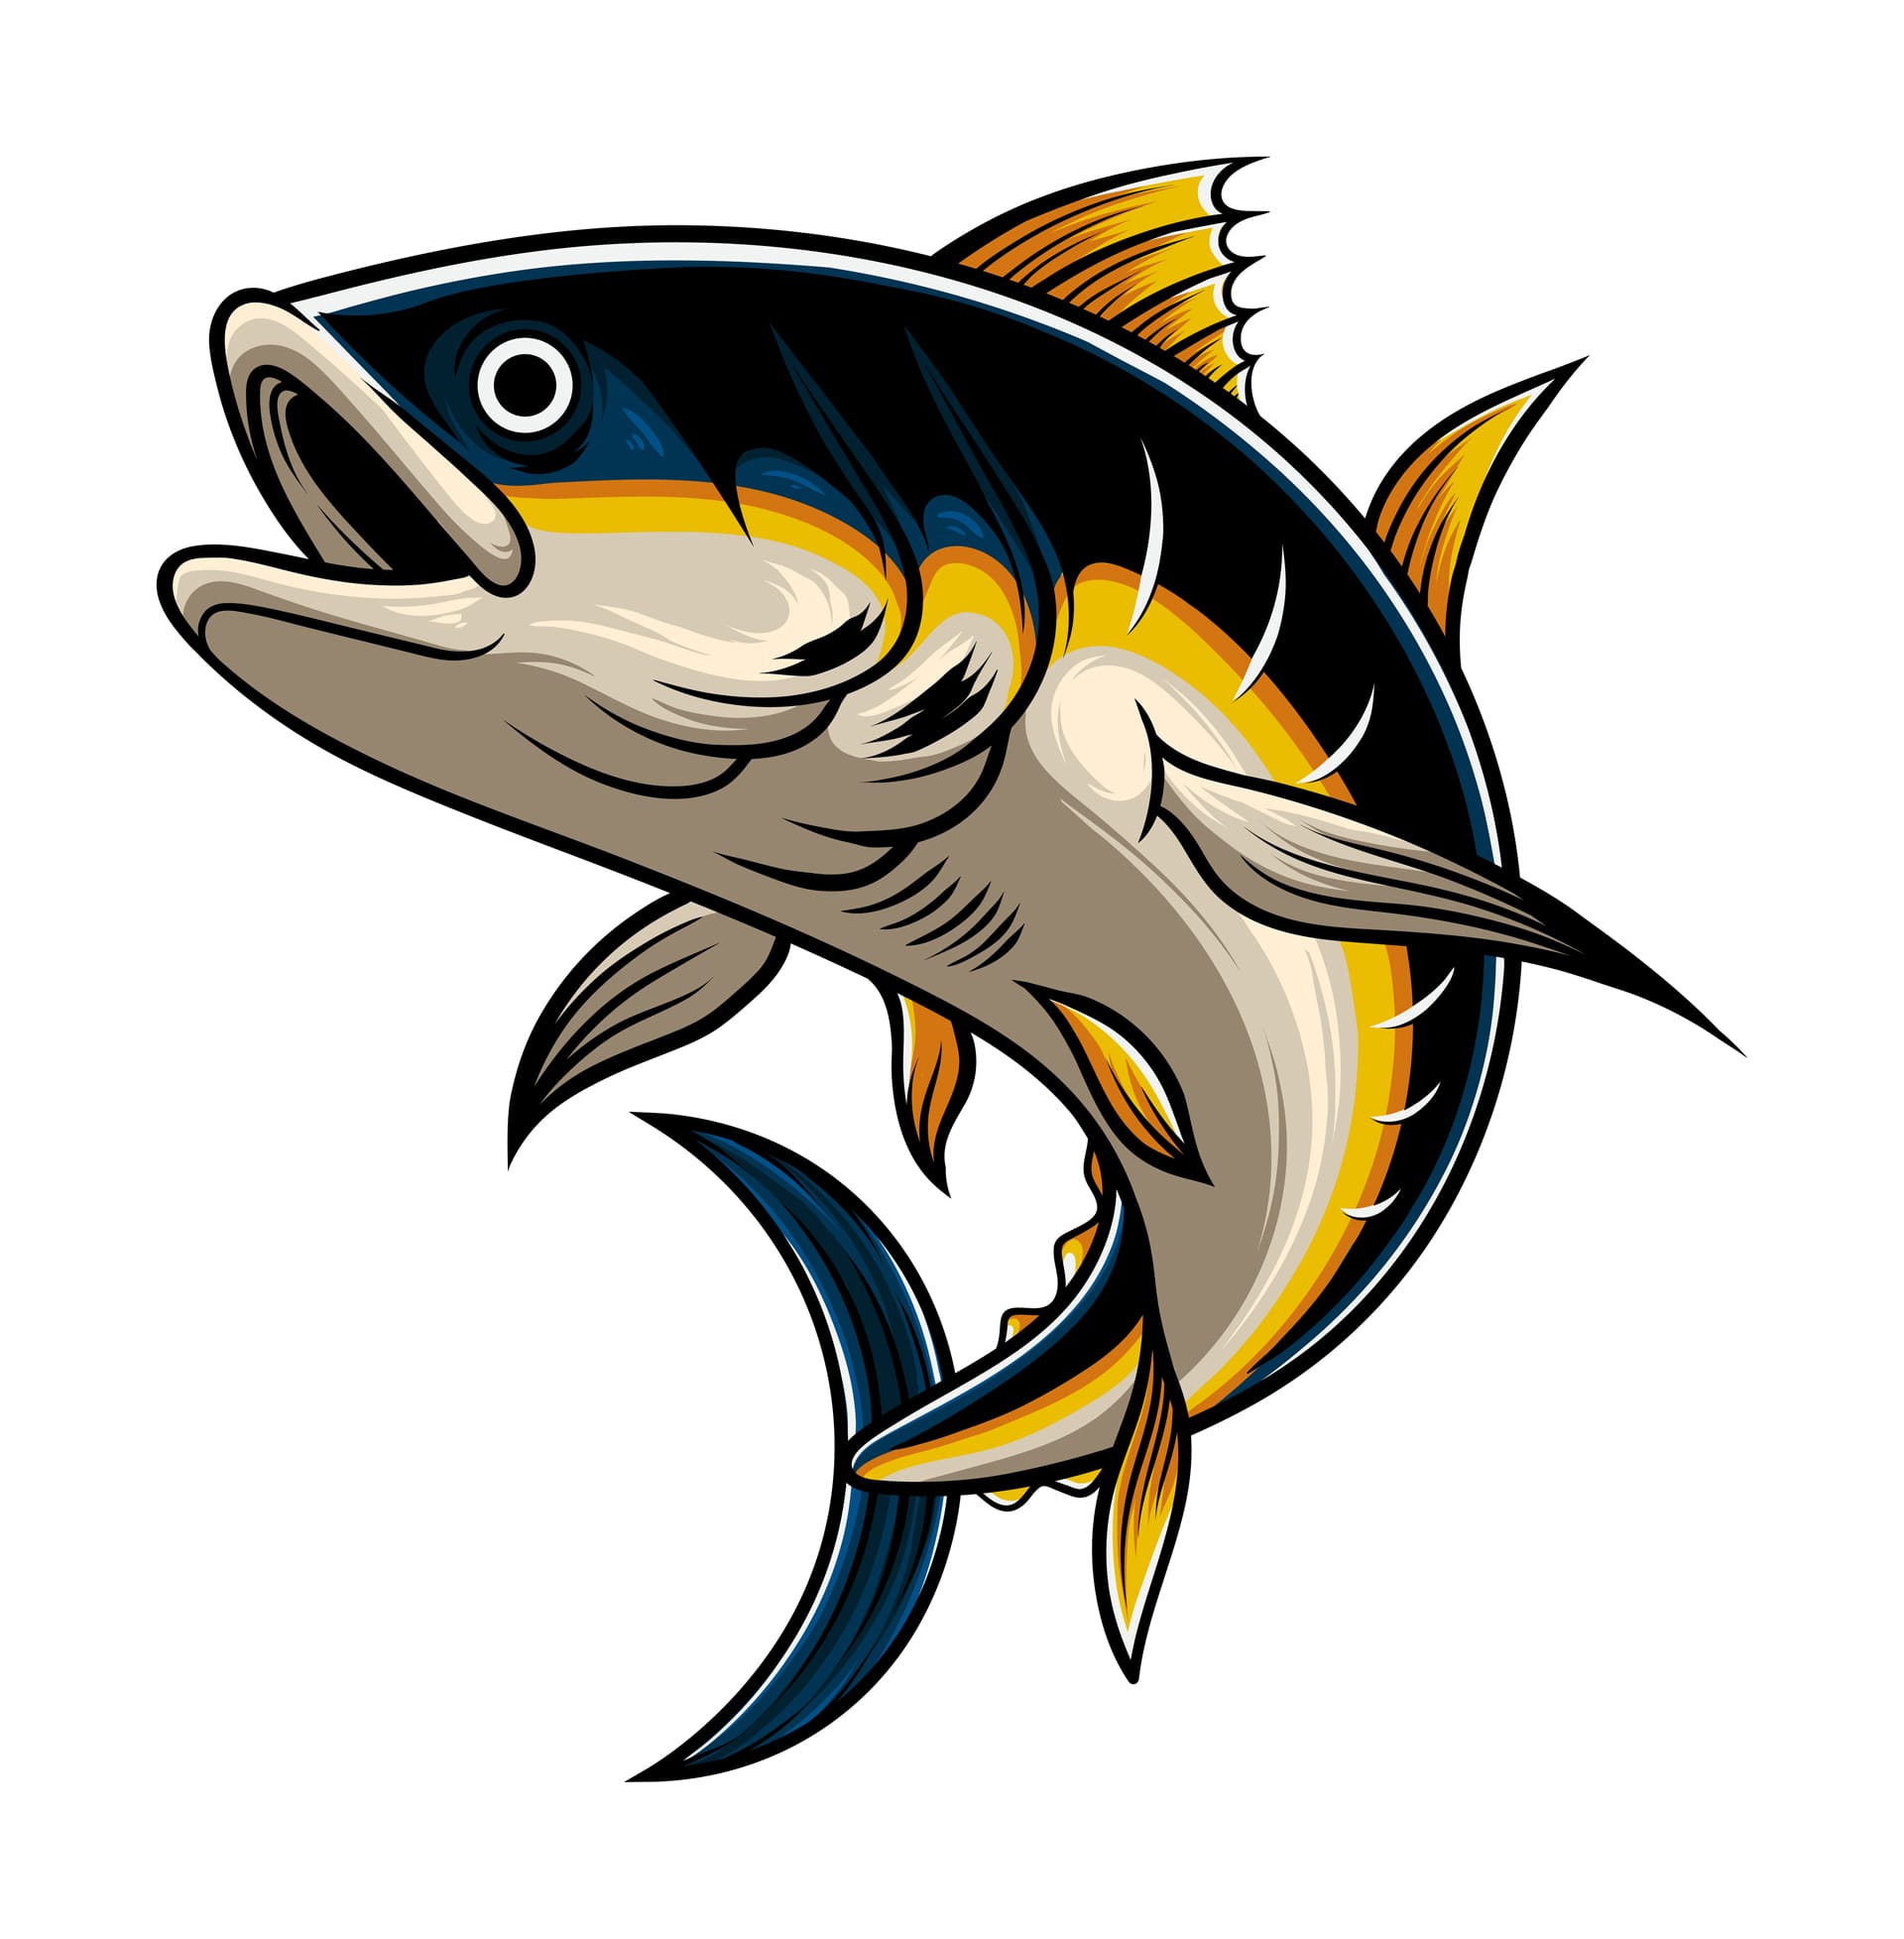 Cool tuna vintage style illustration with premium quality stock image